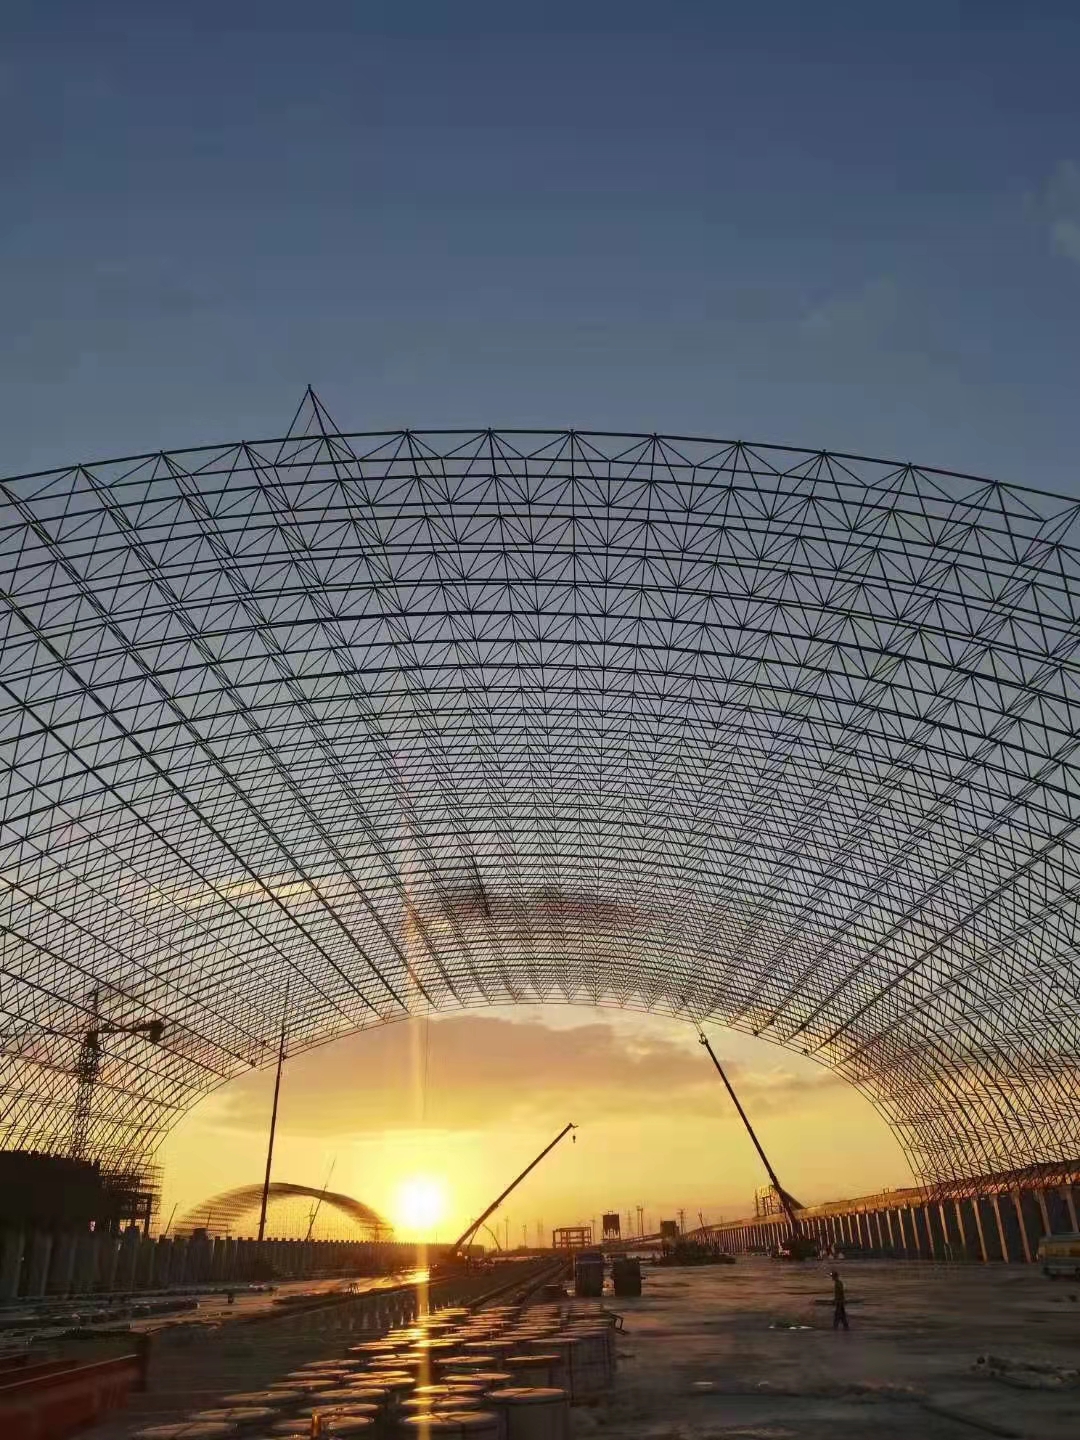 Thermal power plant space frame structure